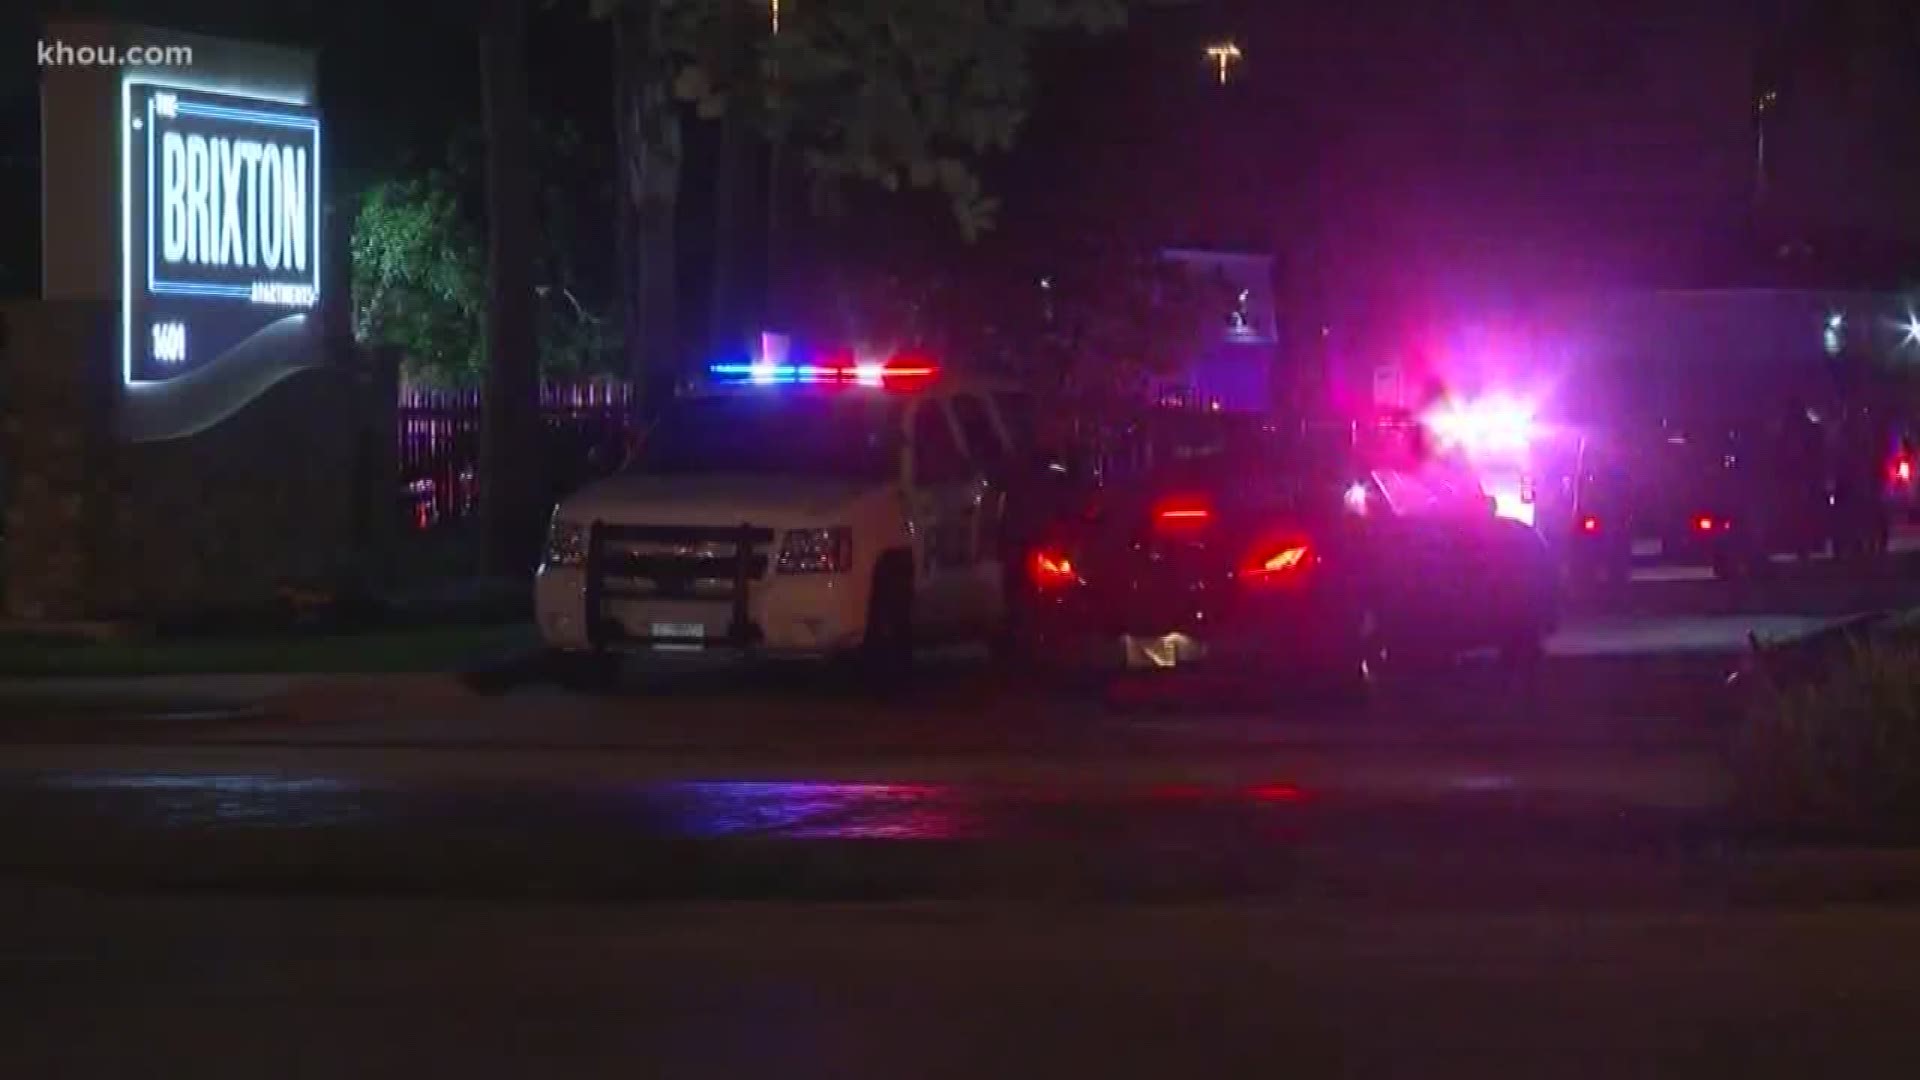 An officer fatally shot a woman as he attempted to arrest her at an apartment complex in Baytown late Monday, police said.